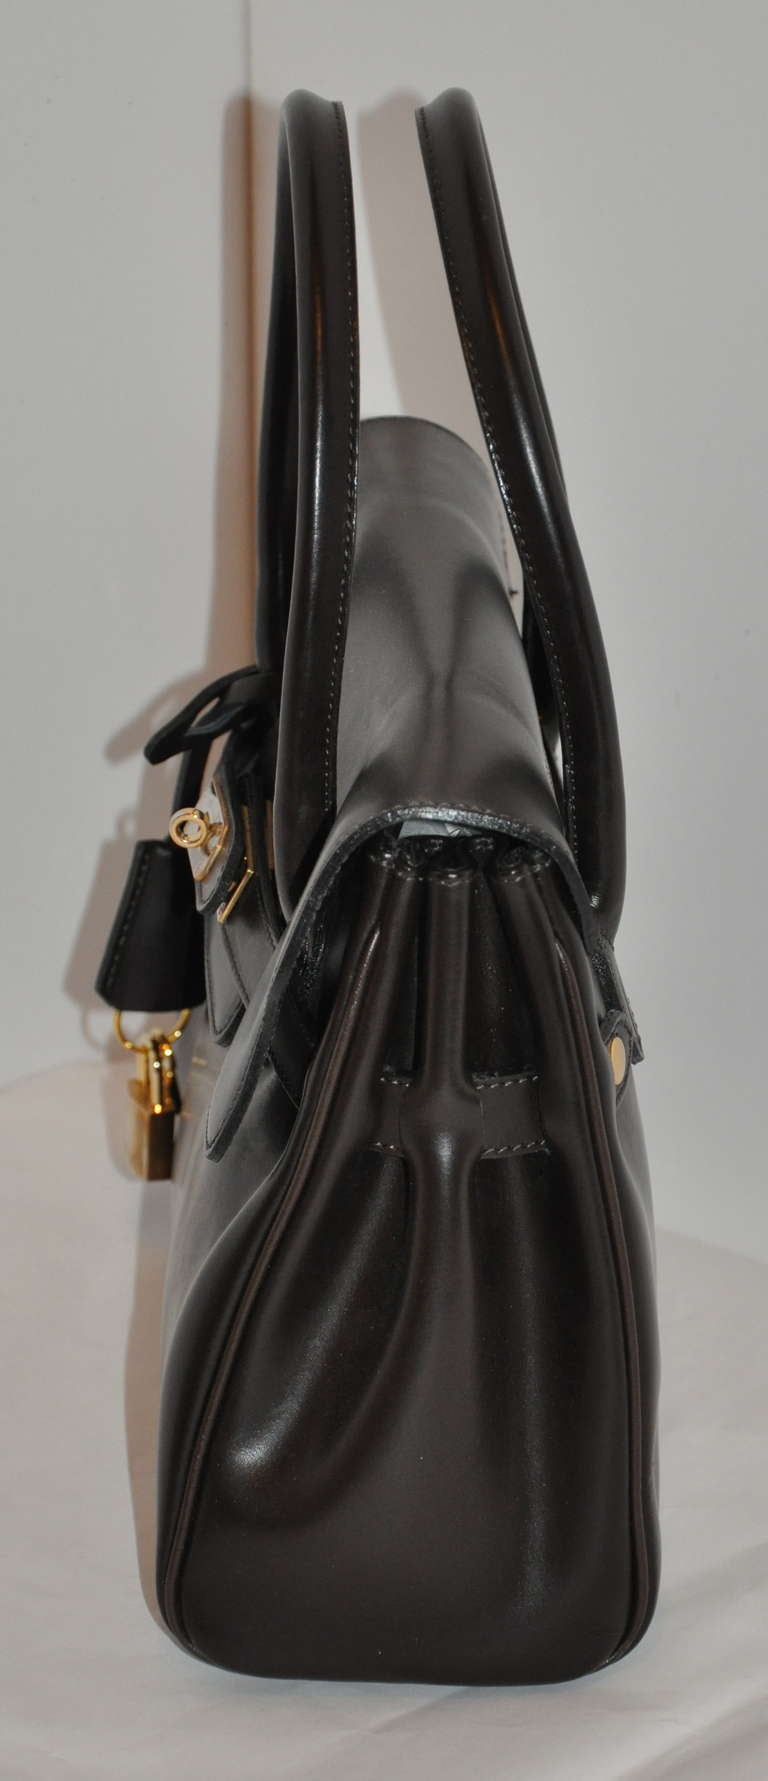 PHYNES Black Leather Handbag with Attachable Shoulder Straps For Sale at 1stdibs